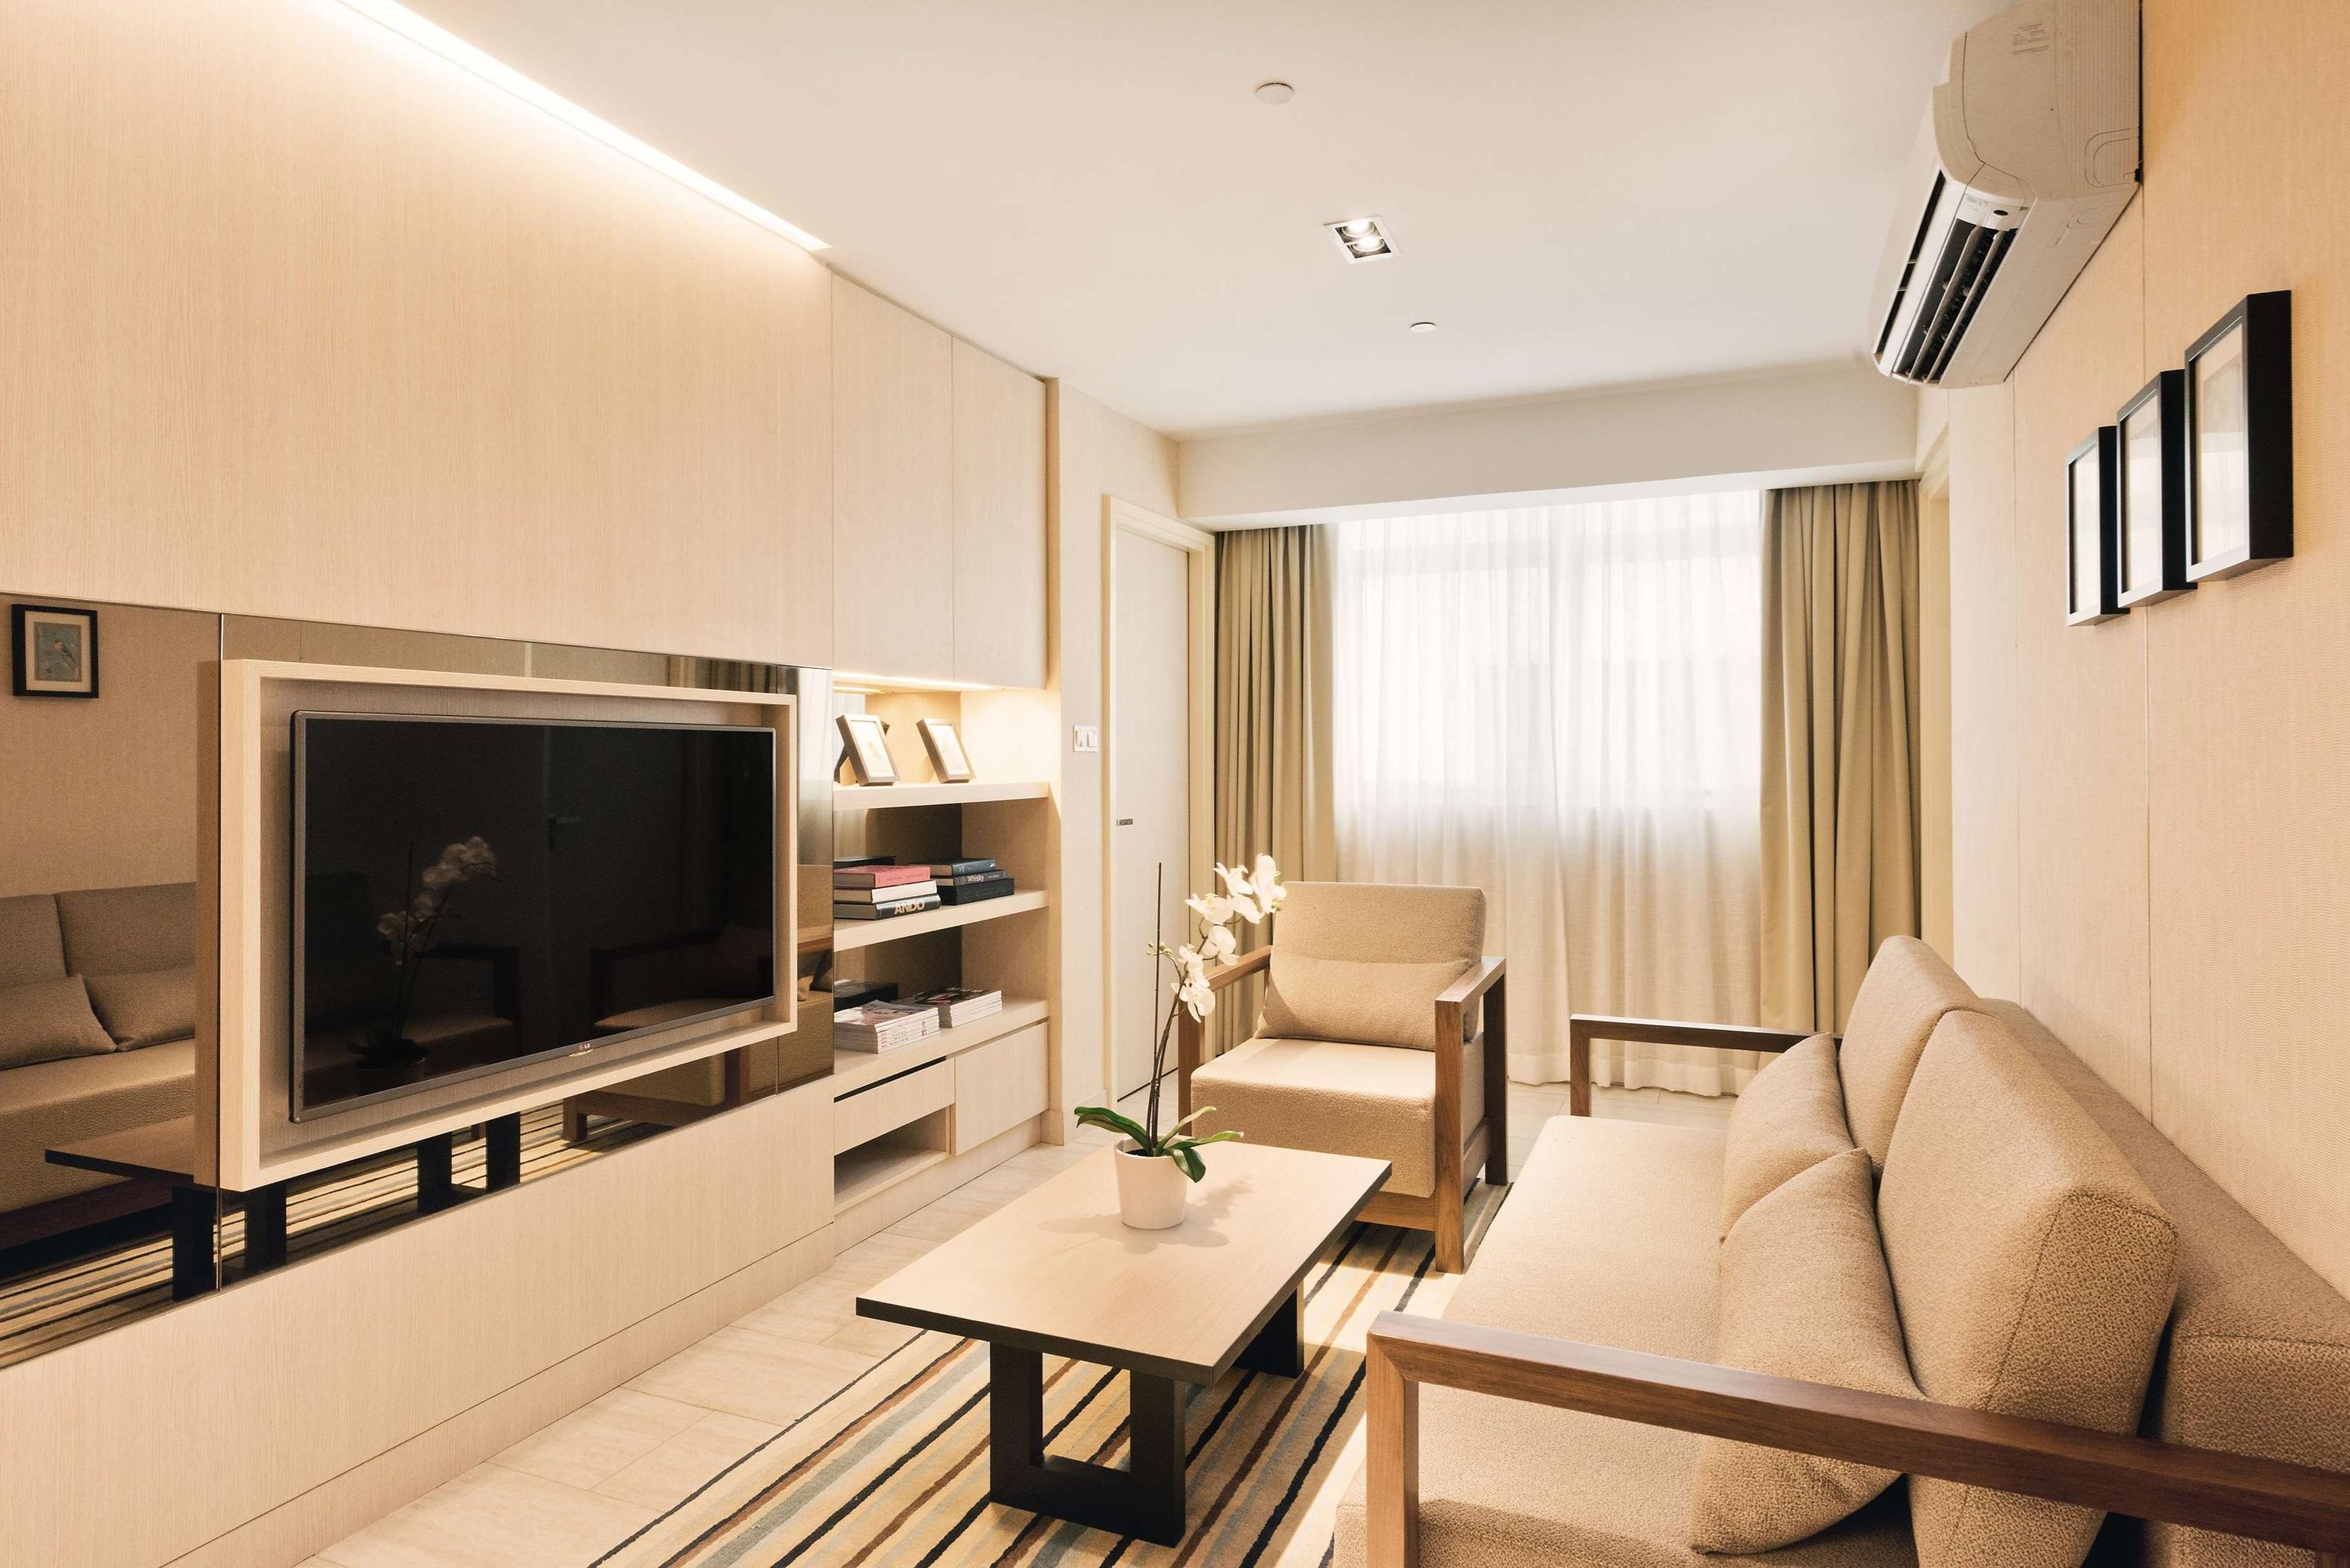 HOTEL PARKROYAL SERVICED SUITES KUALA LUMPUR 5* (Malaysia) - from £ 49 |  HOTELMIX